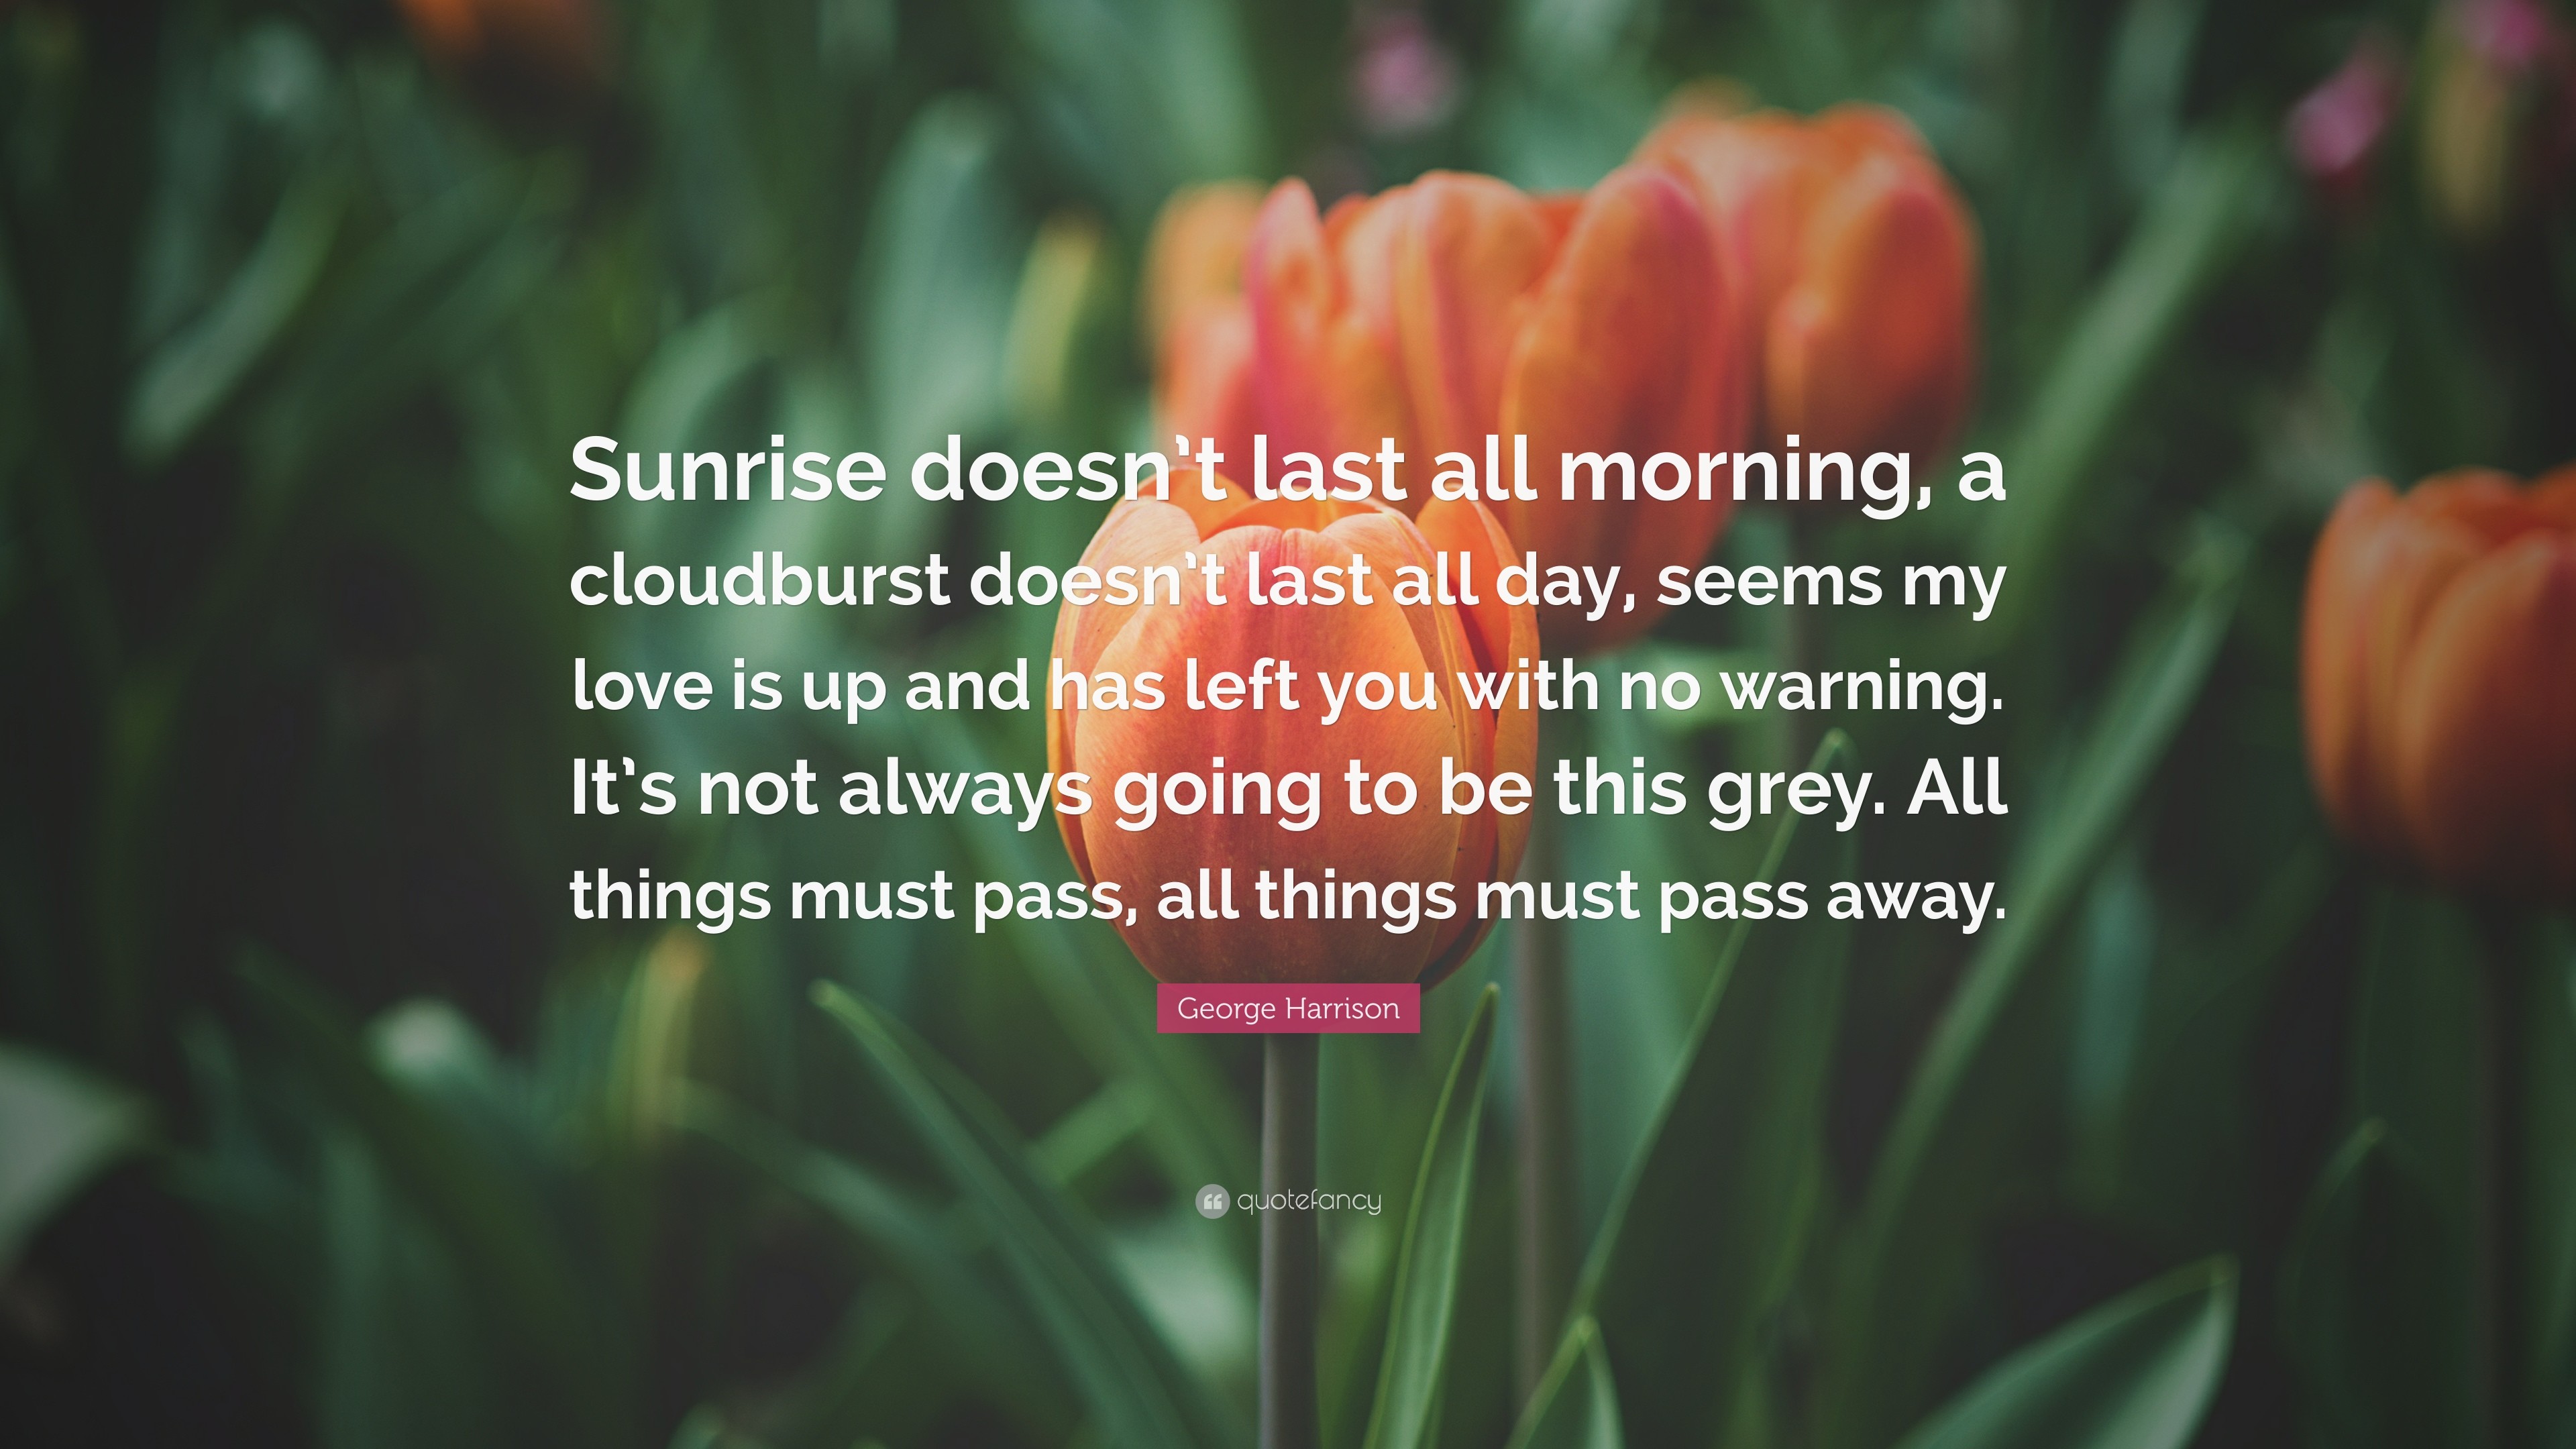 3840x2160 George Harrison Quote: “Sunrise doesn't last all morning, a cloudburst doesn